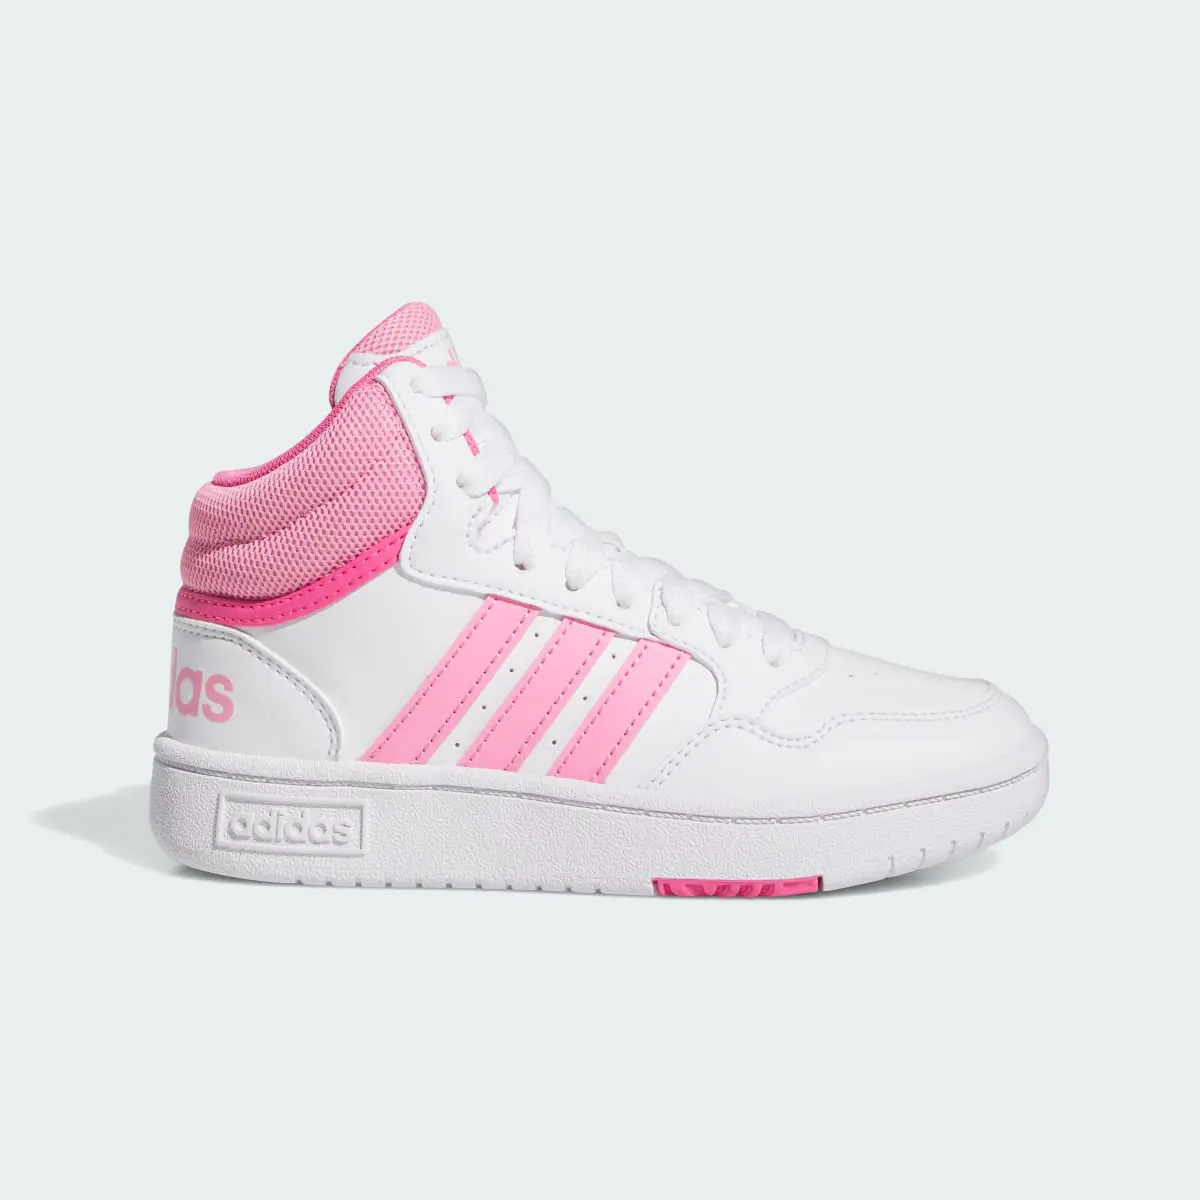 Adidas Chaussure Hoops Mid. 2